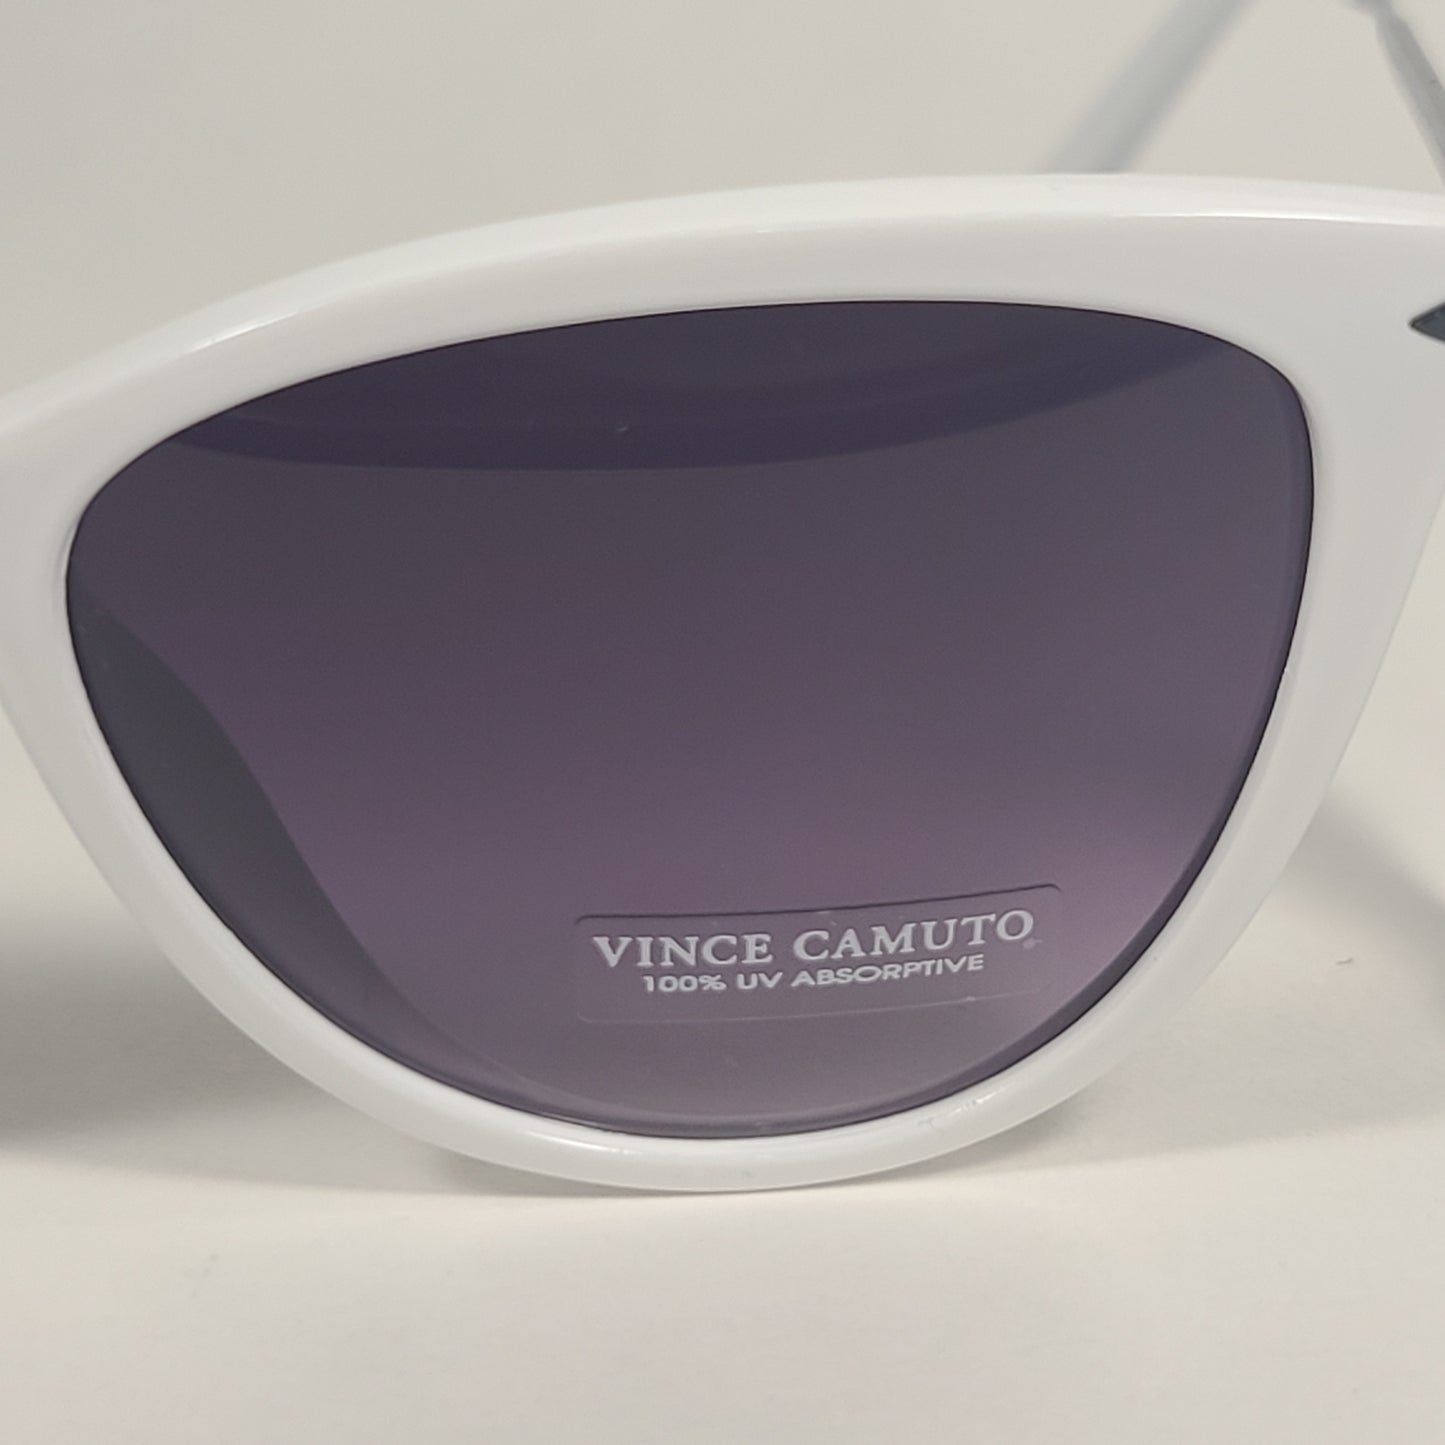 Vince Camuto Cat Eye Sunglasses White And Black Frame Smoke Gradient Lens VC961 WHOX - Sunglasses